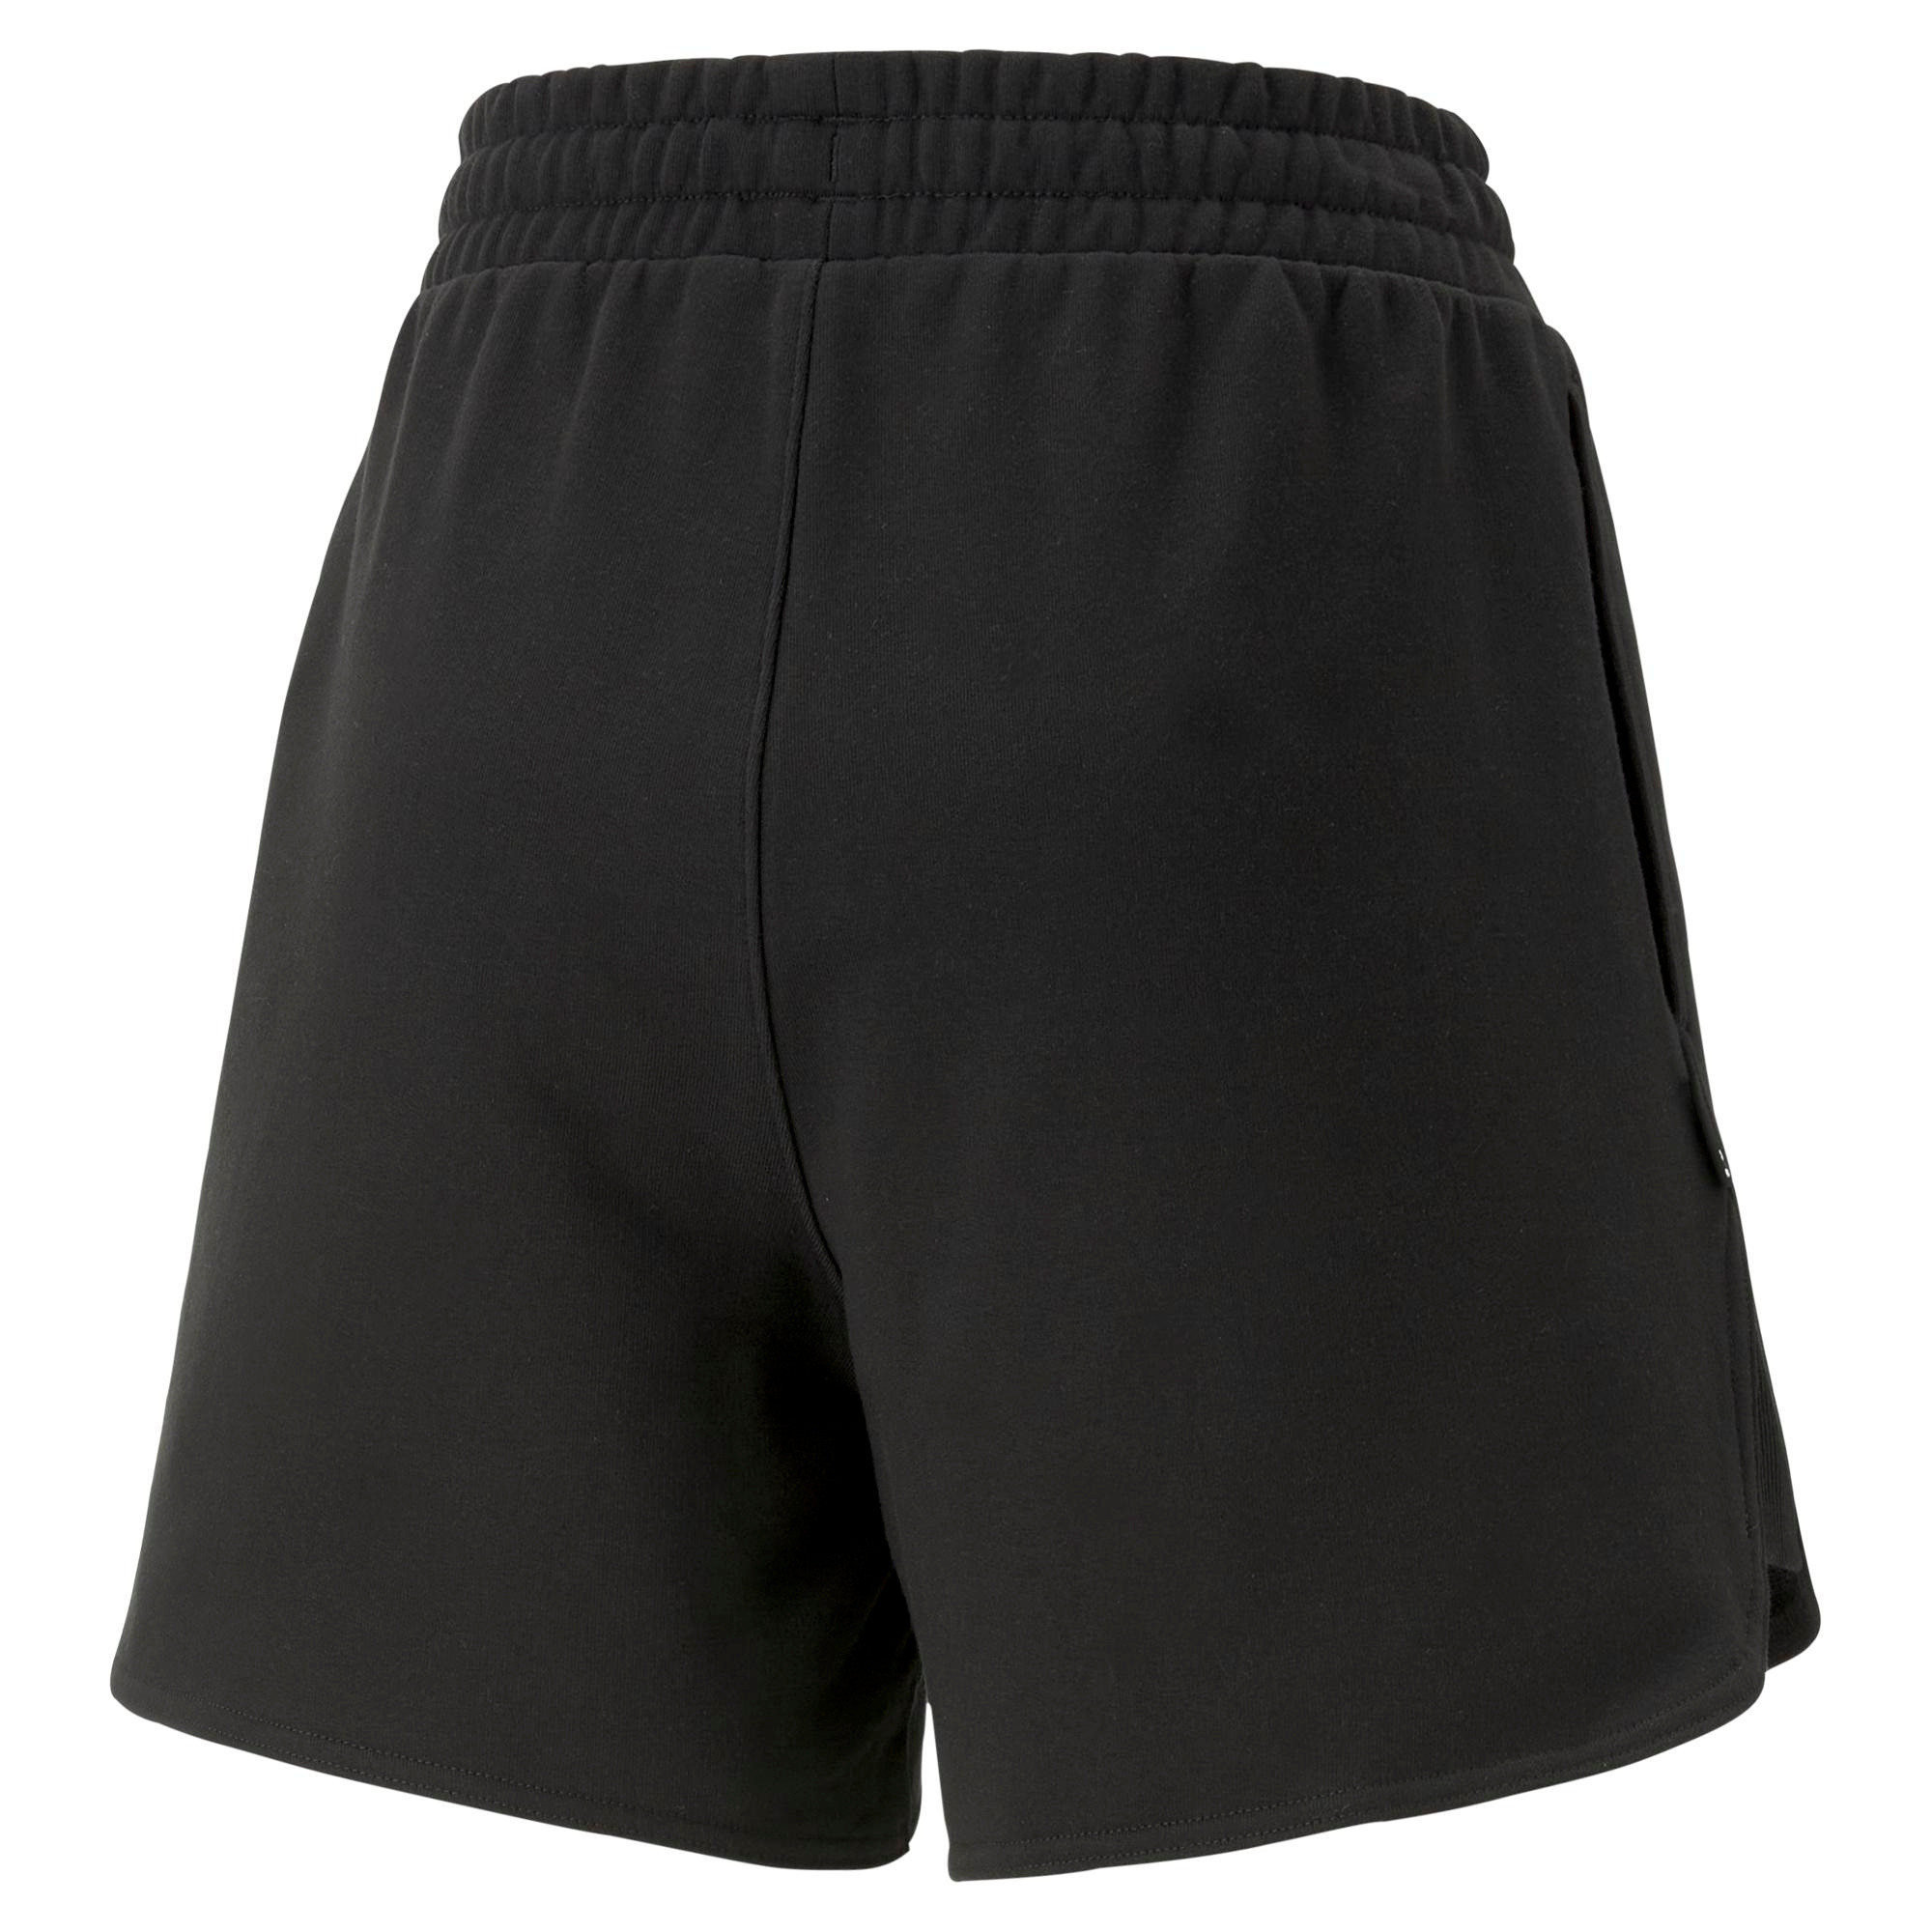 Puma - Downtown high-waisted shorts, Black, large image number 1